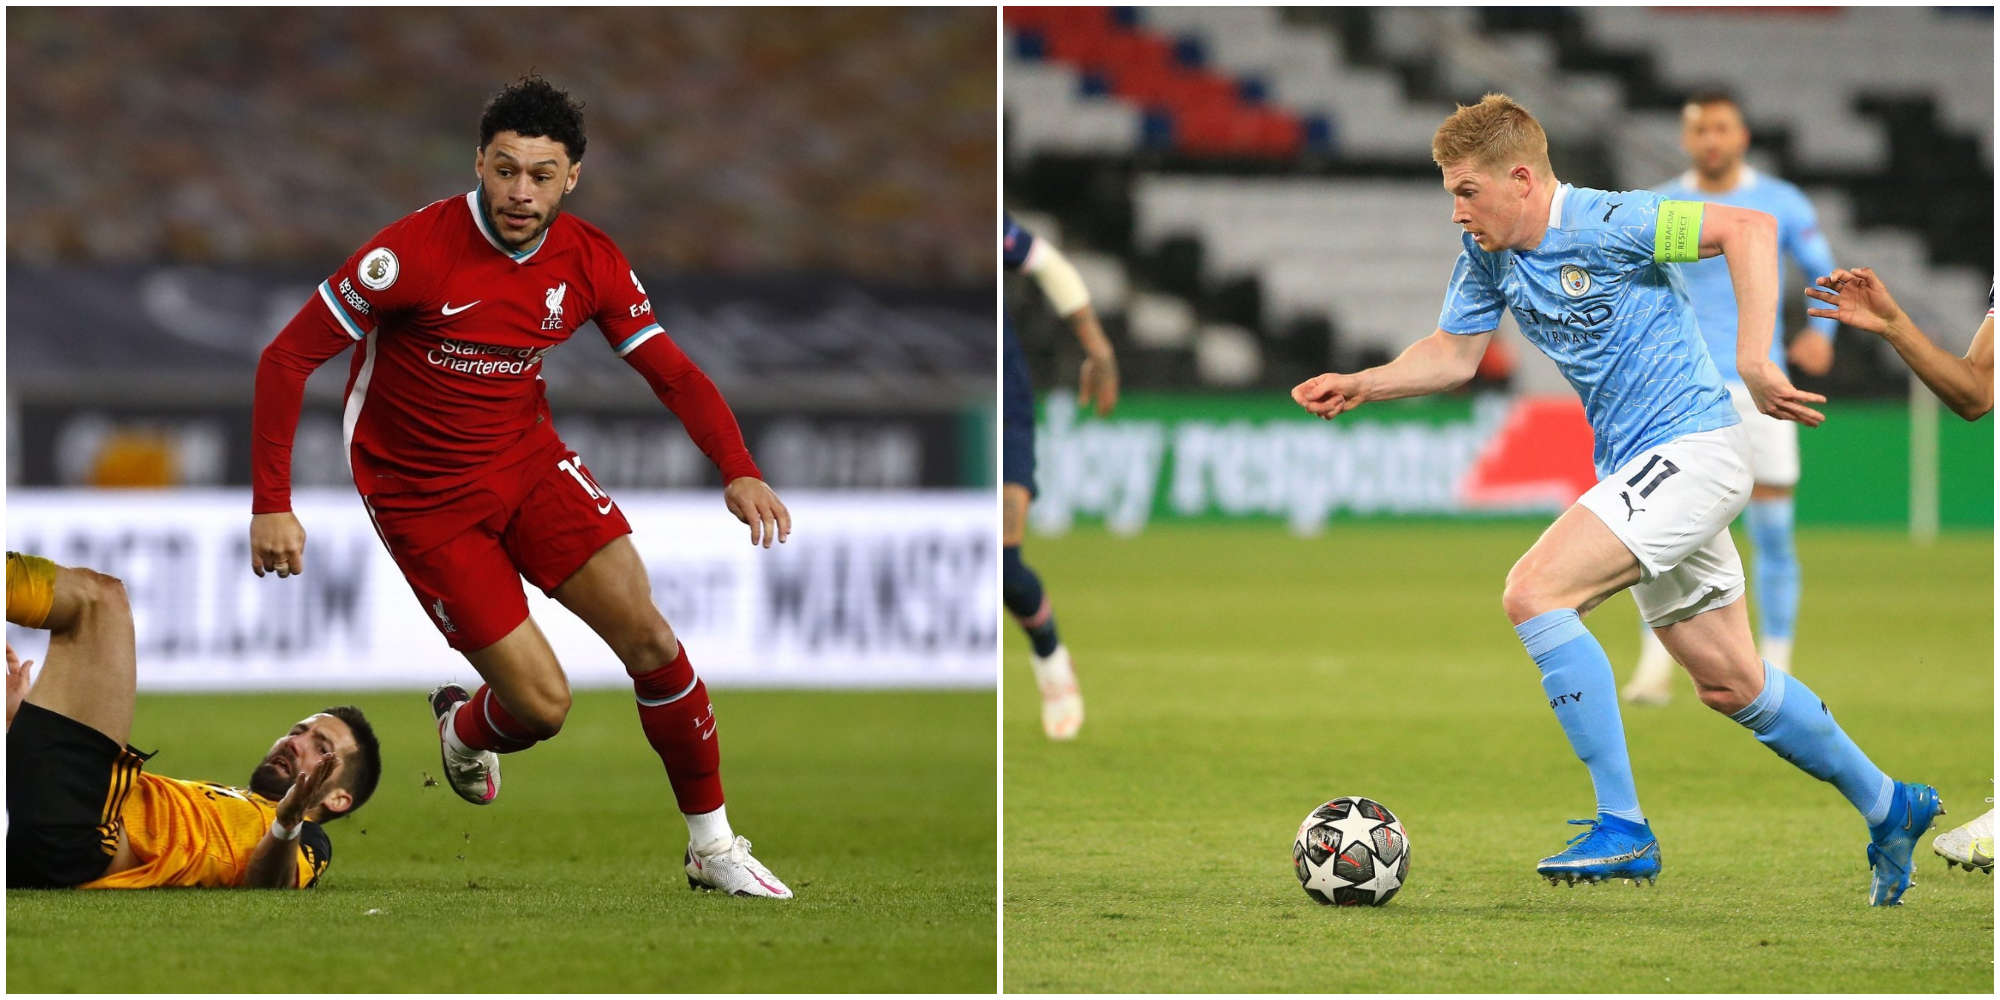 Liverpool midfielder names world-class Manchester City star he looks up to: ‘He’s got great numbers’